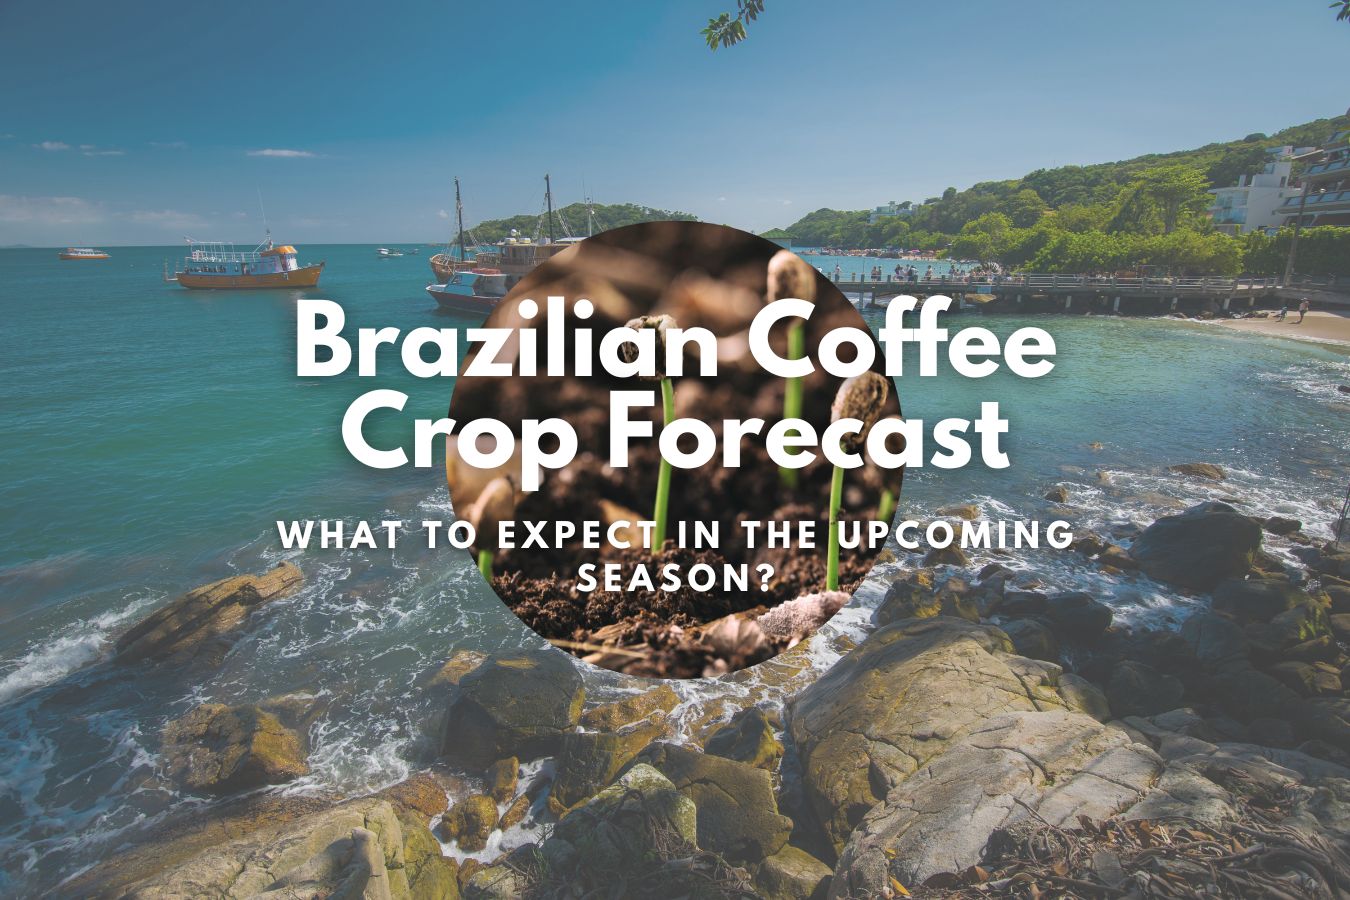 Brazilian Coffee Crop Forecast: What to Expect in the Upcoming Season?